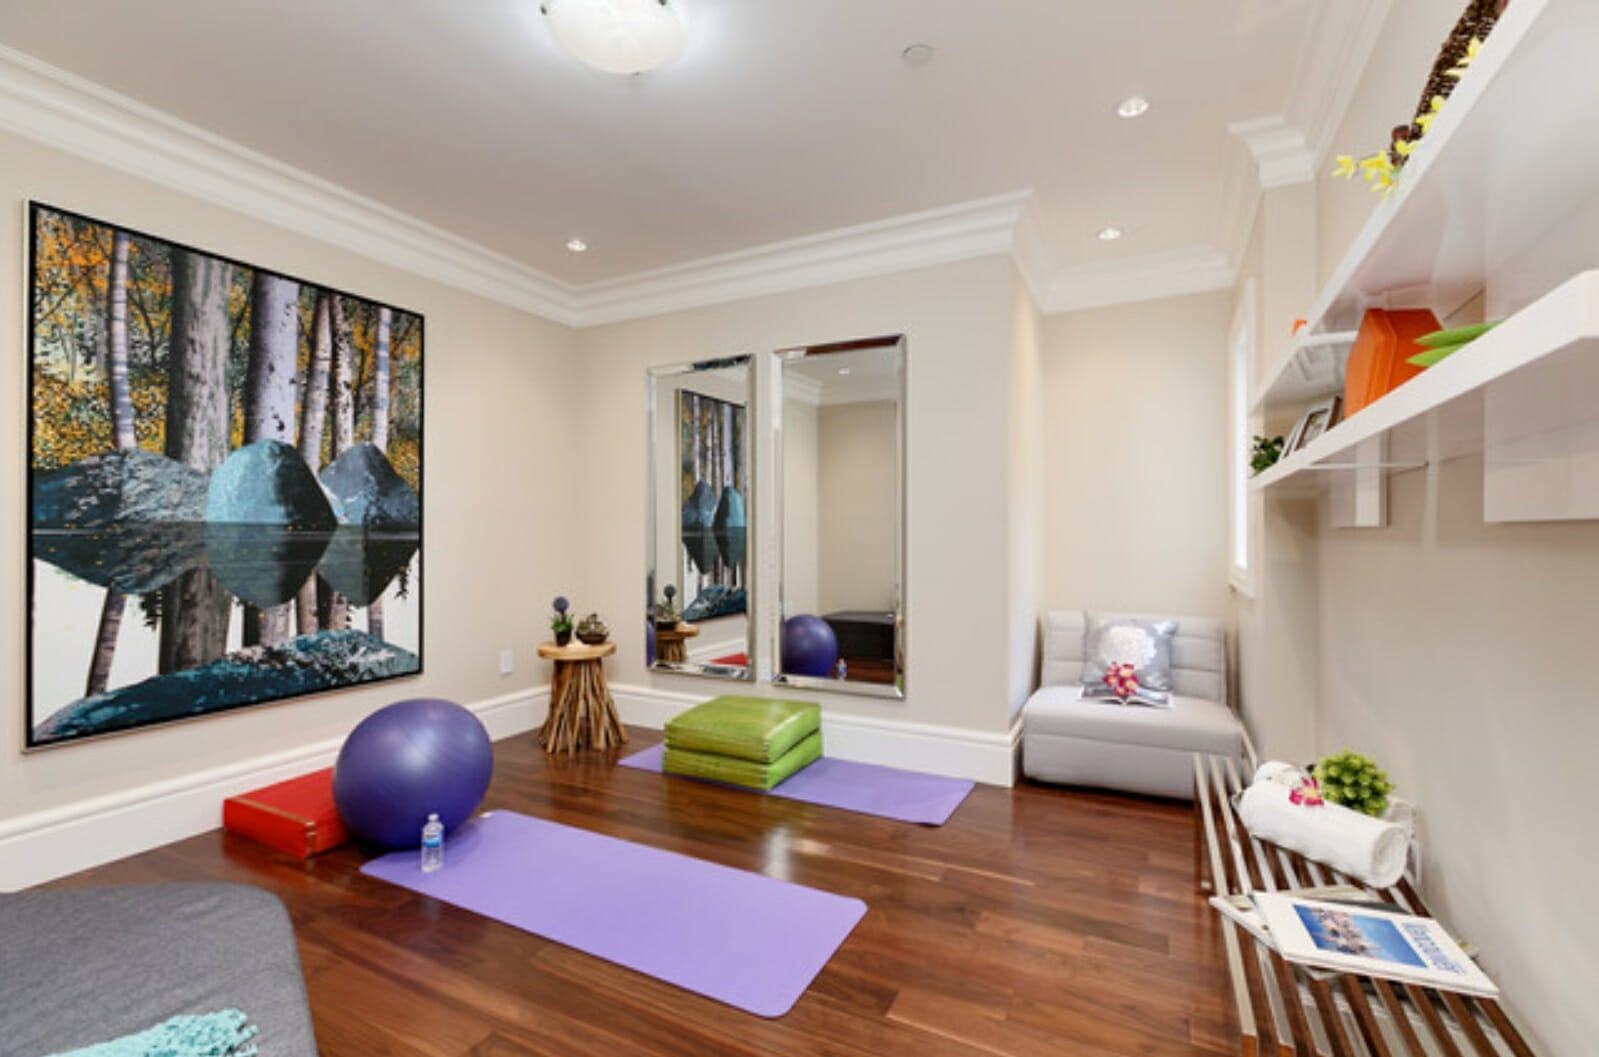 How To Set Up A Yoga Room At Home